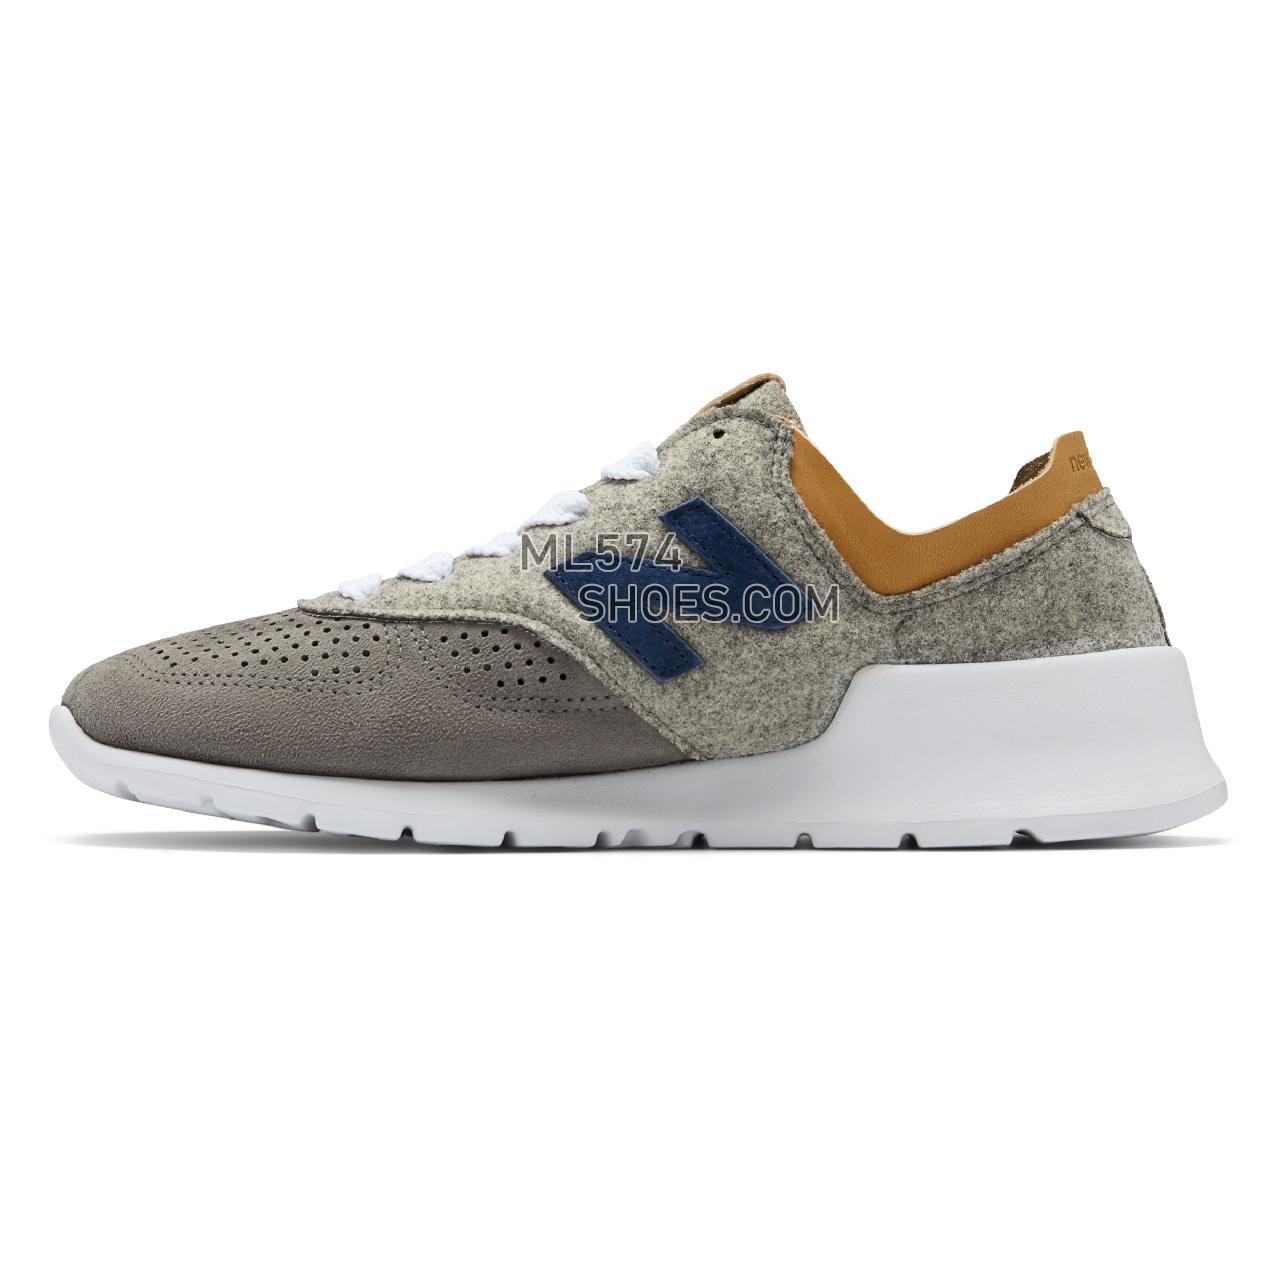 New Balance 1978 Made in US - Men's 1978 - Classic Grey with Tan - ML1978SO